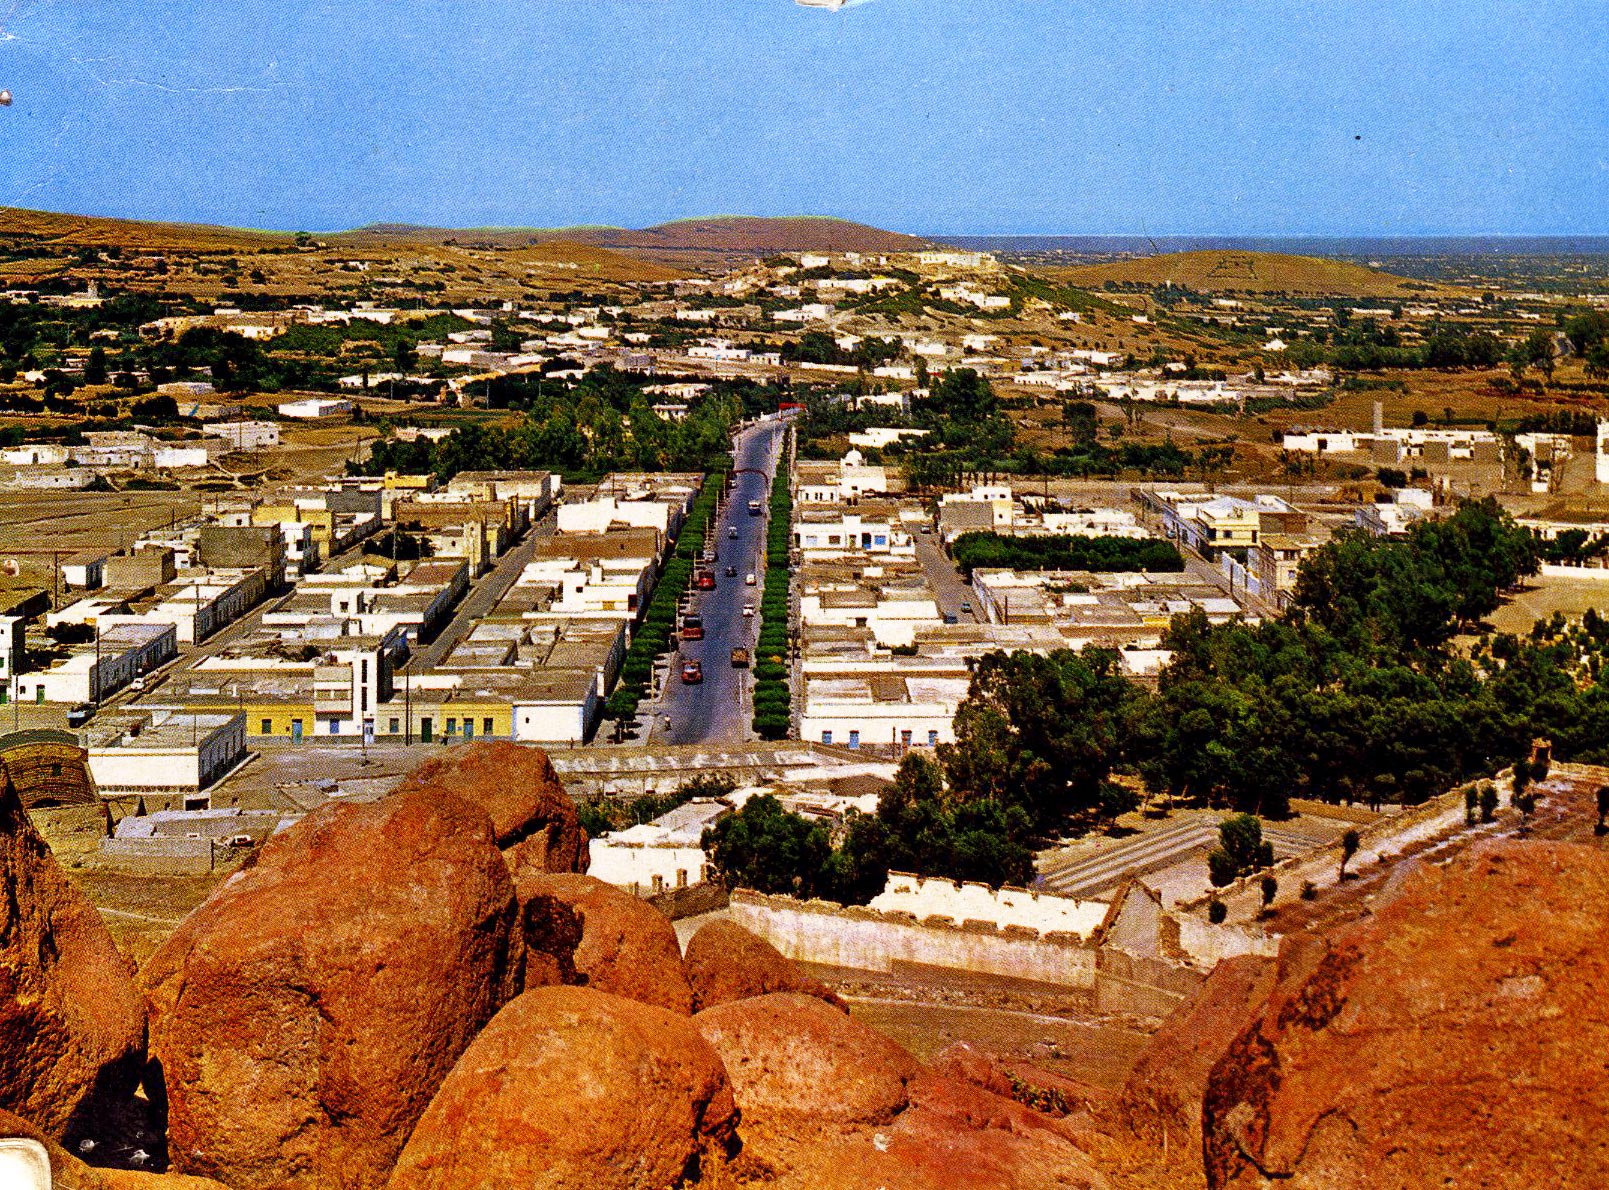 View of the town from above